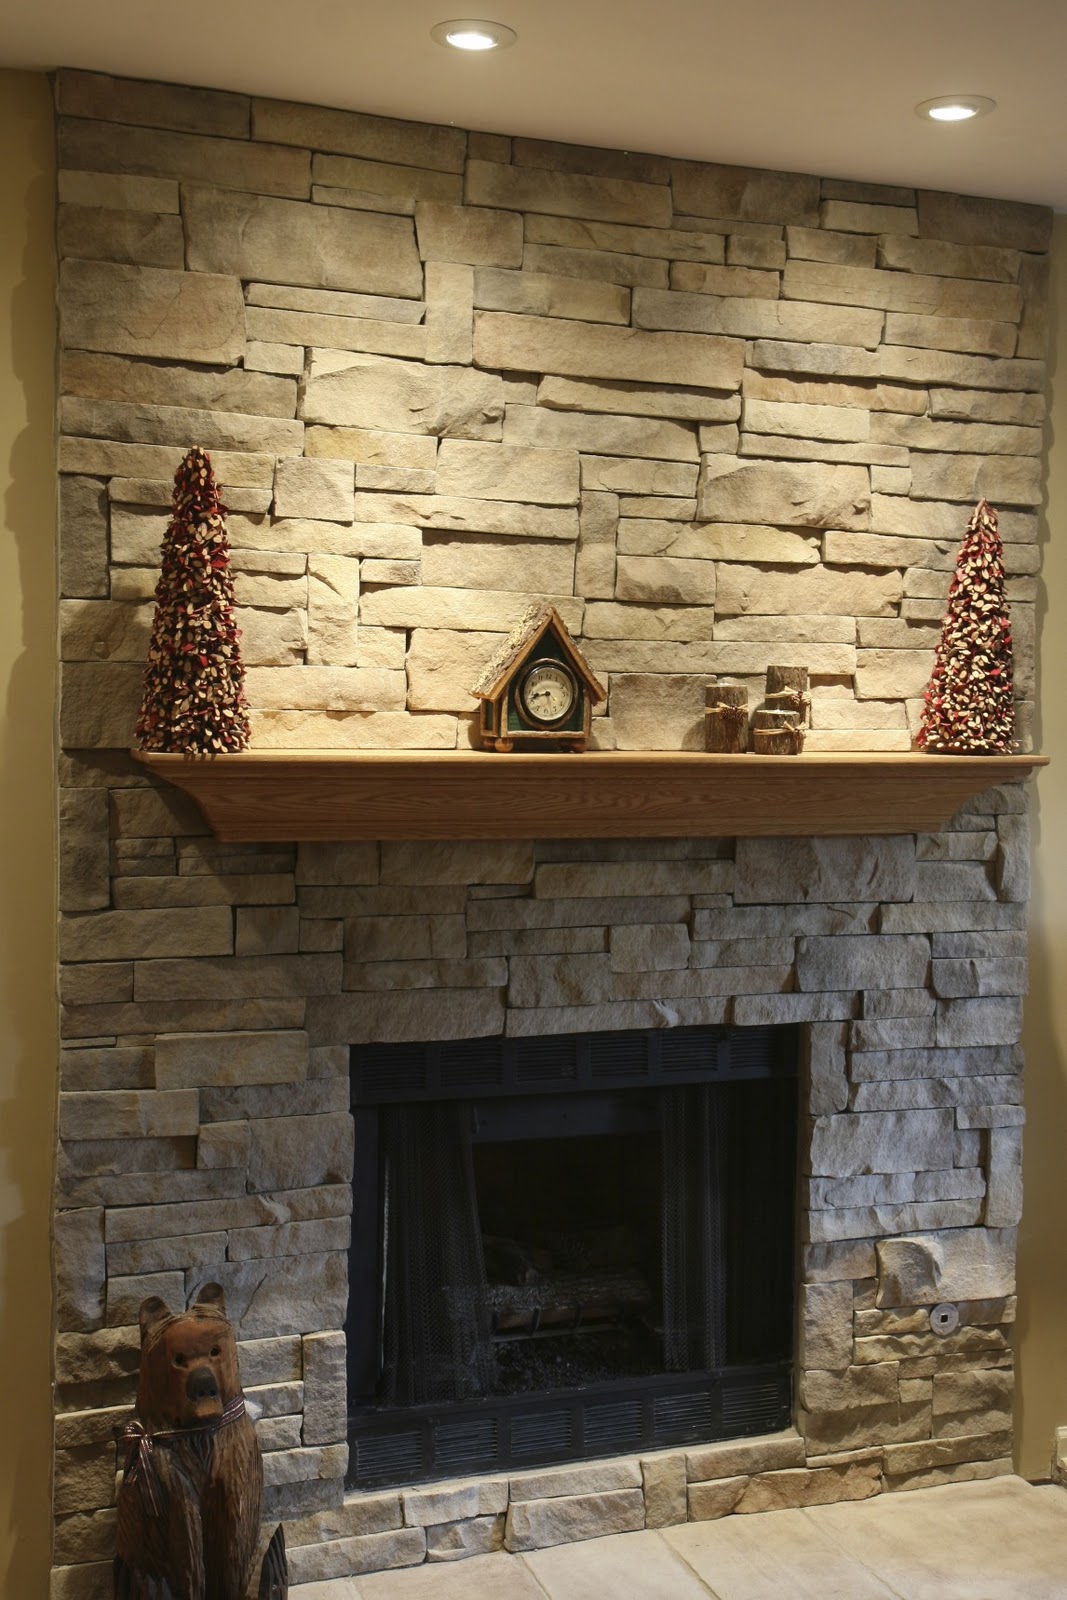 North Star Stone- Stone Fireplaces & Stone Exteriors